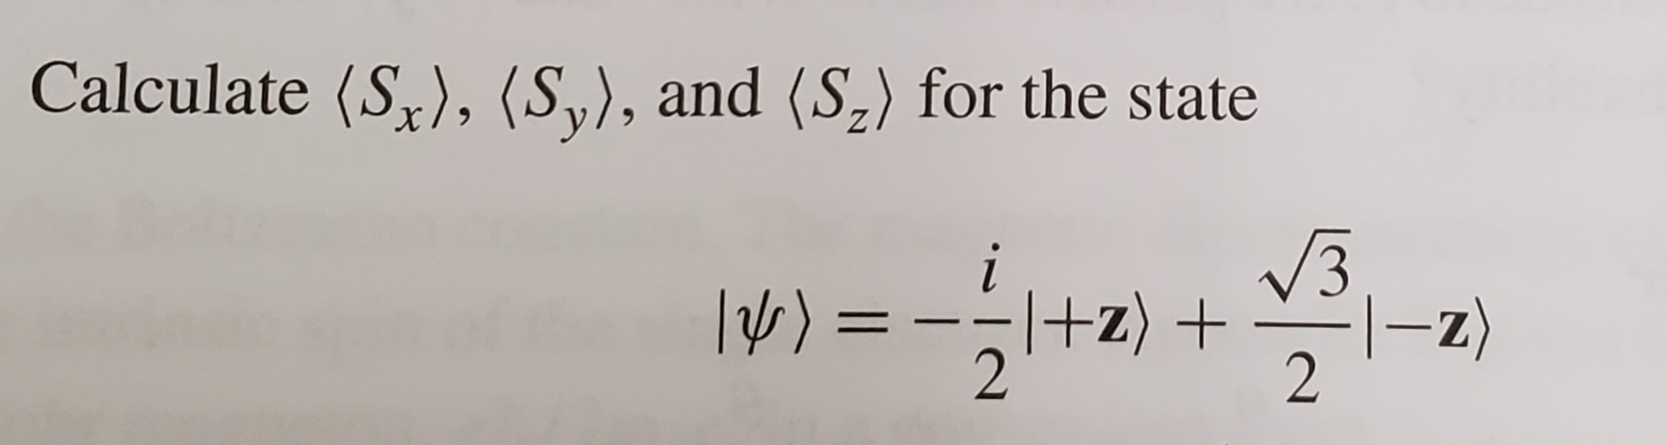 Calculate (S), (Sy), and (S2) for the state
3
+z) +
-z)
2
2
